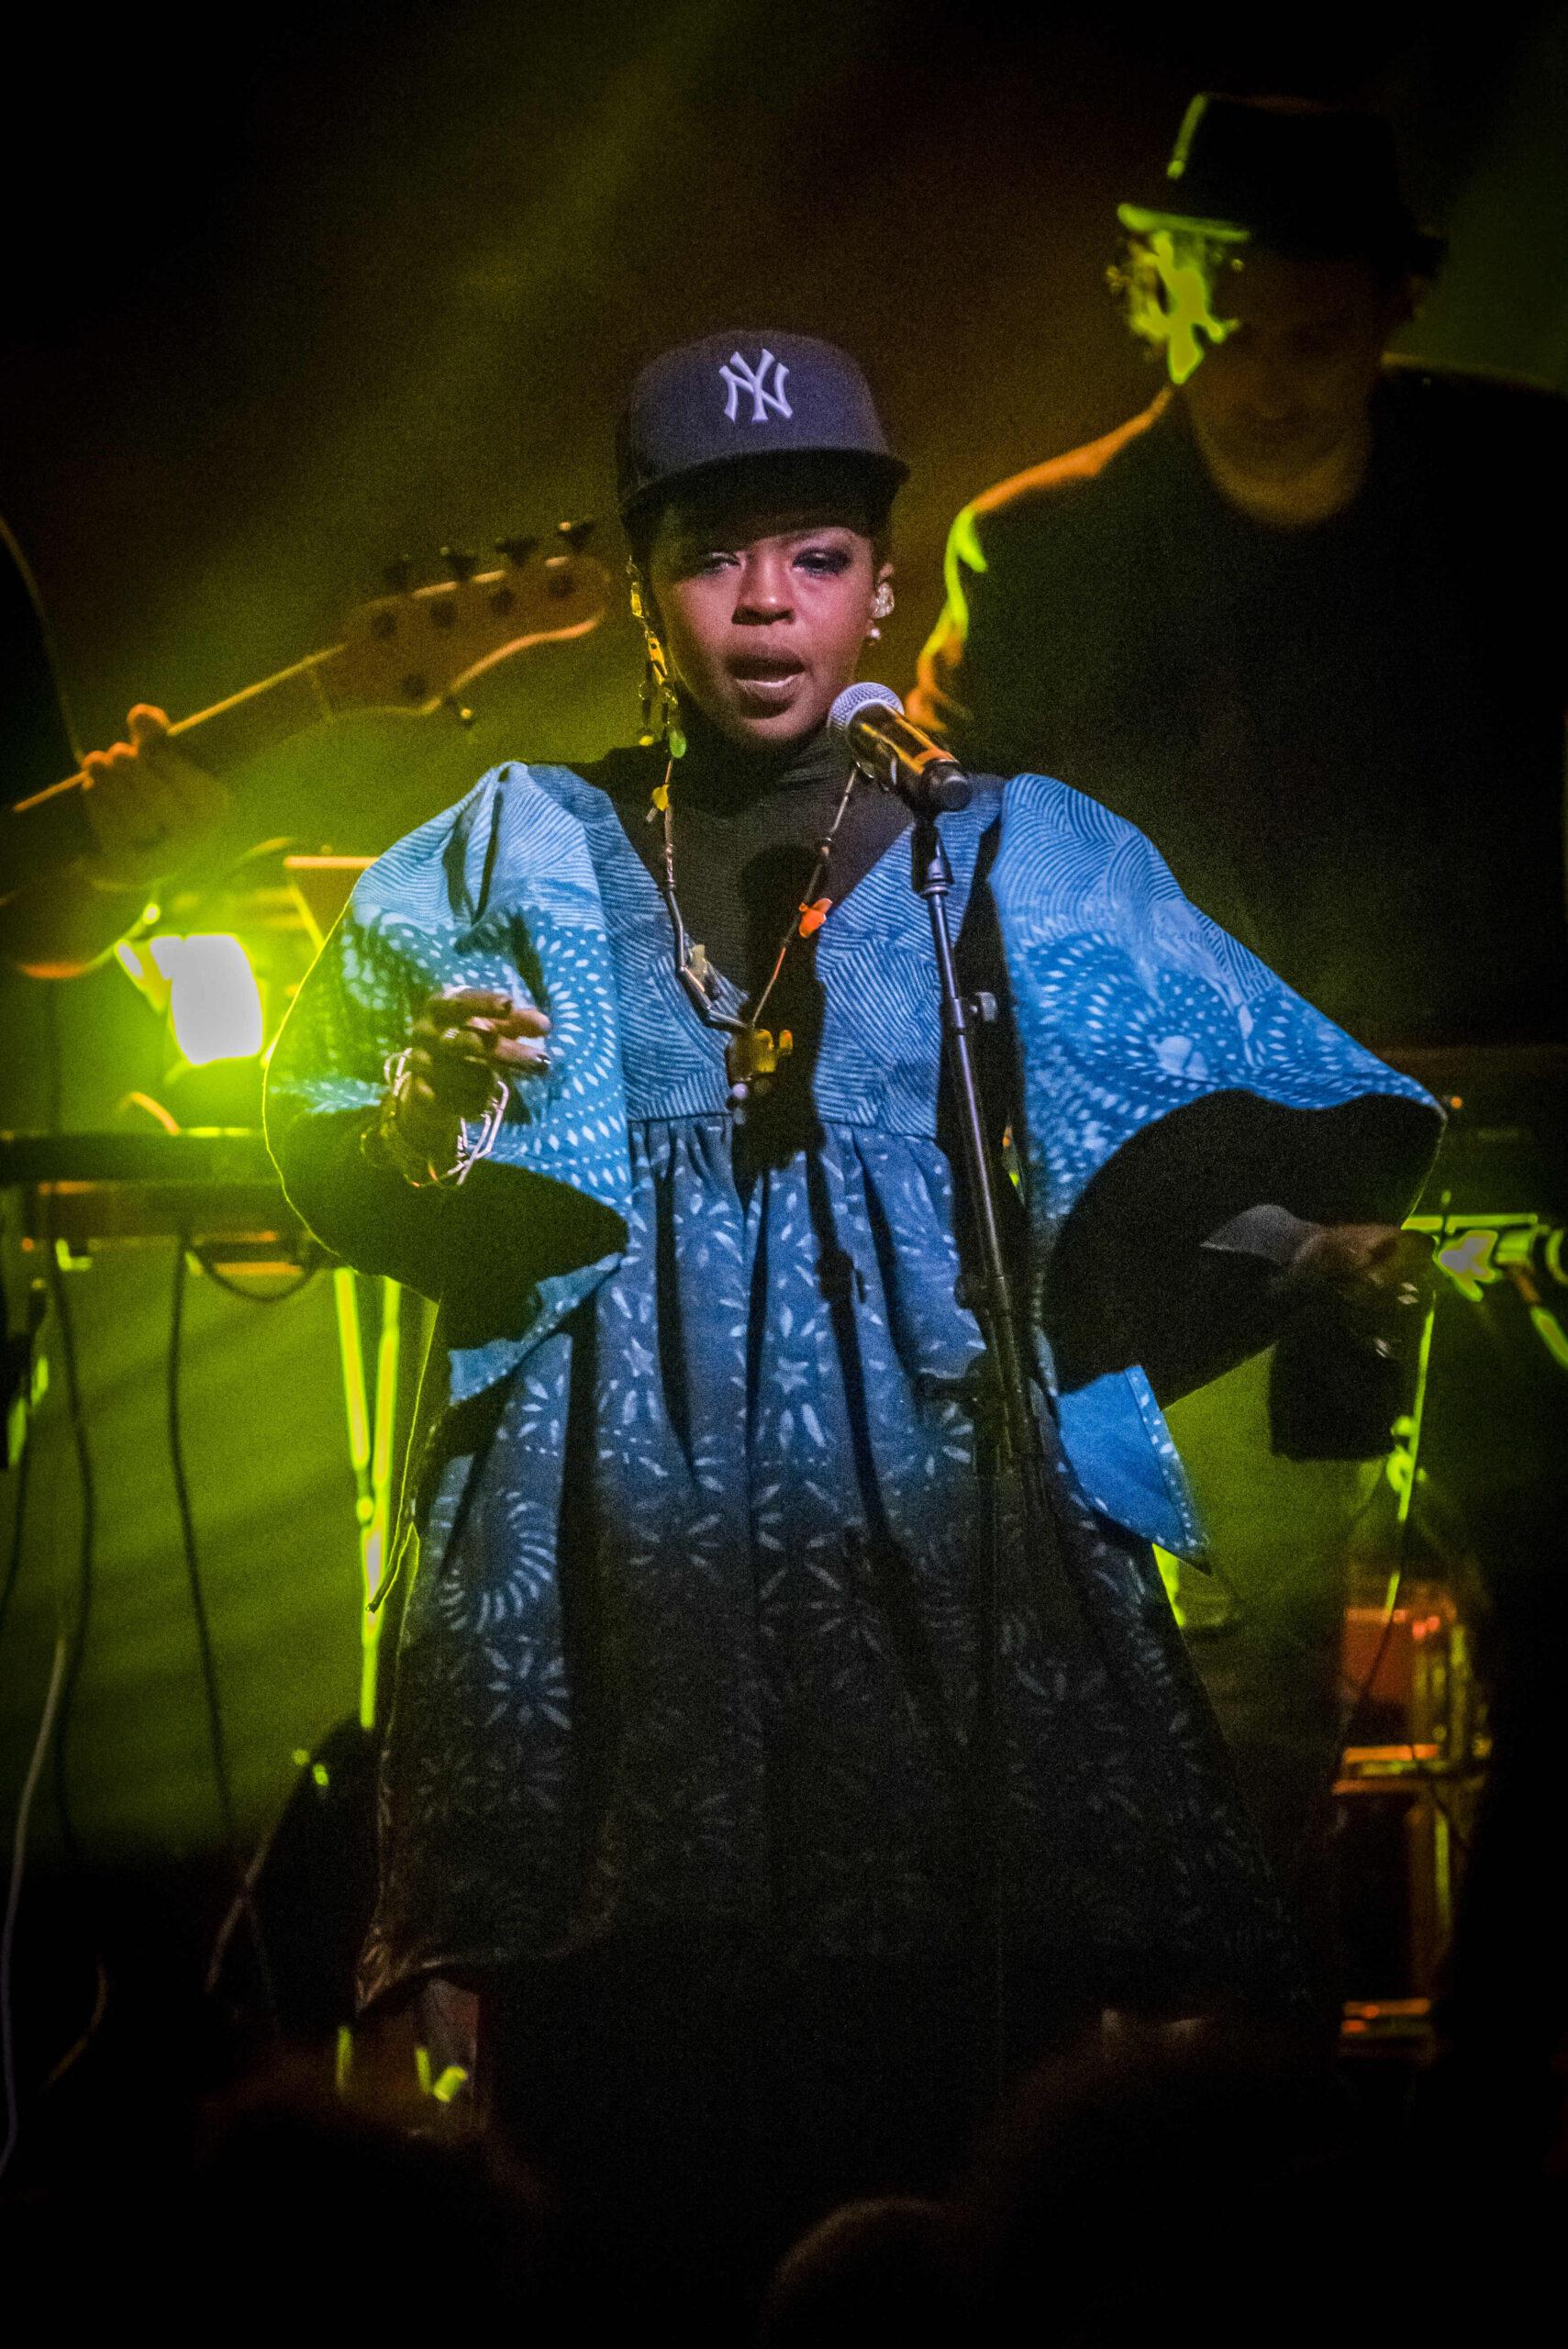 M.S.  LAURYN HILL during her second sold-out performance in Asheville, North Carolina.